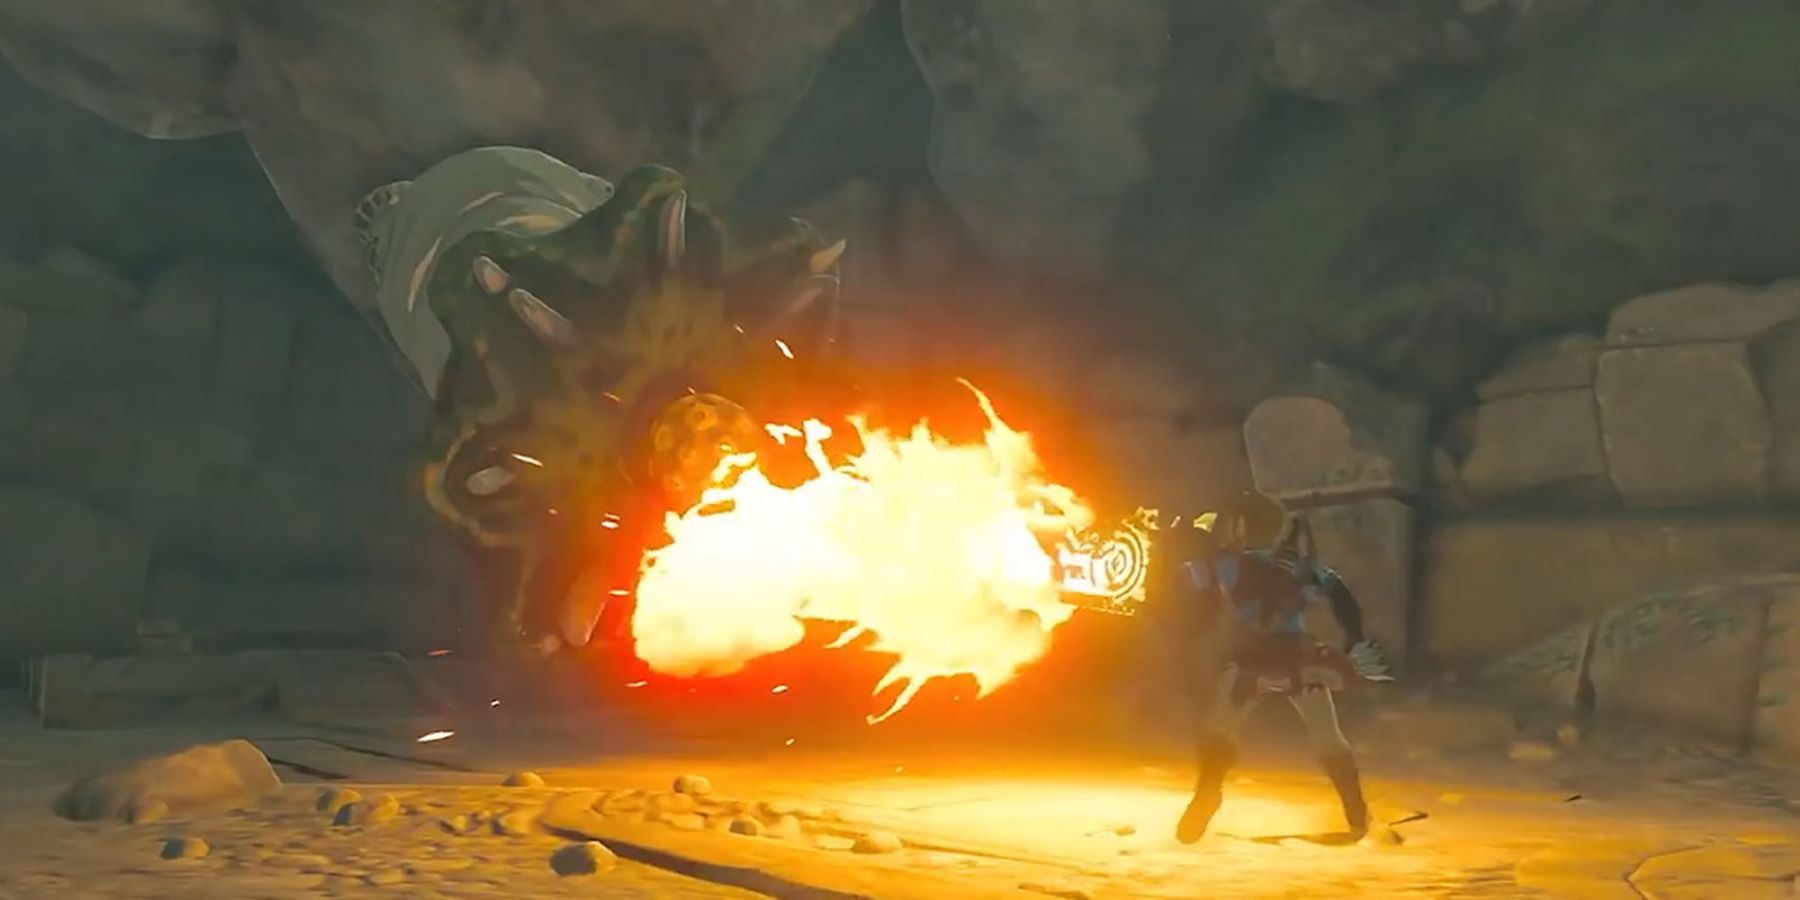 Link in a cavern burning a worm-like enemy with his flamethrower during a trailer for The Legend of Zelda: Breath of the Wild 2